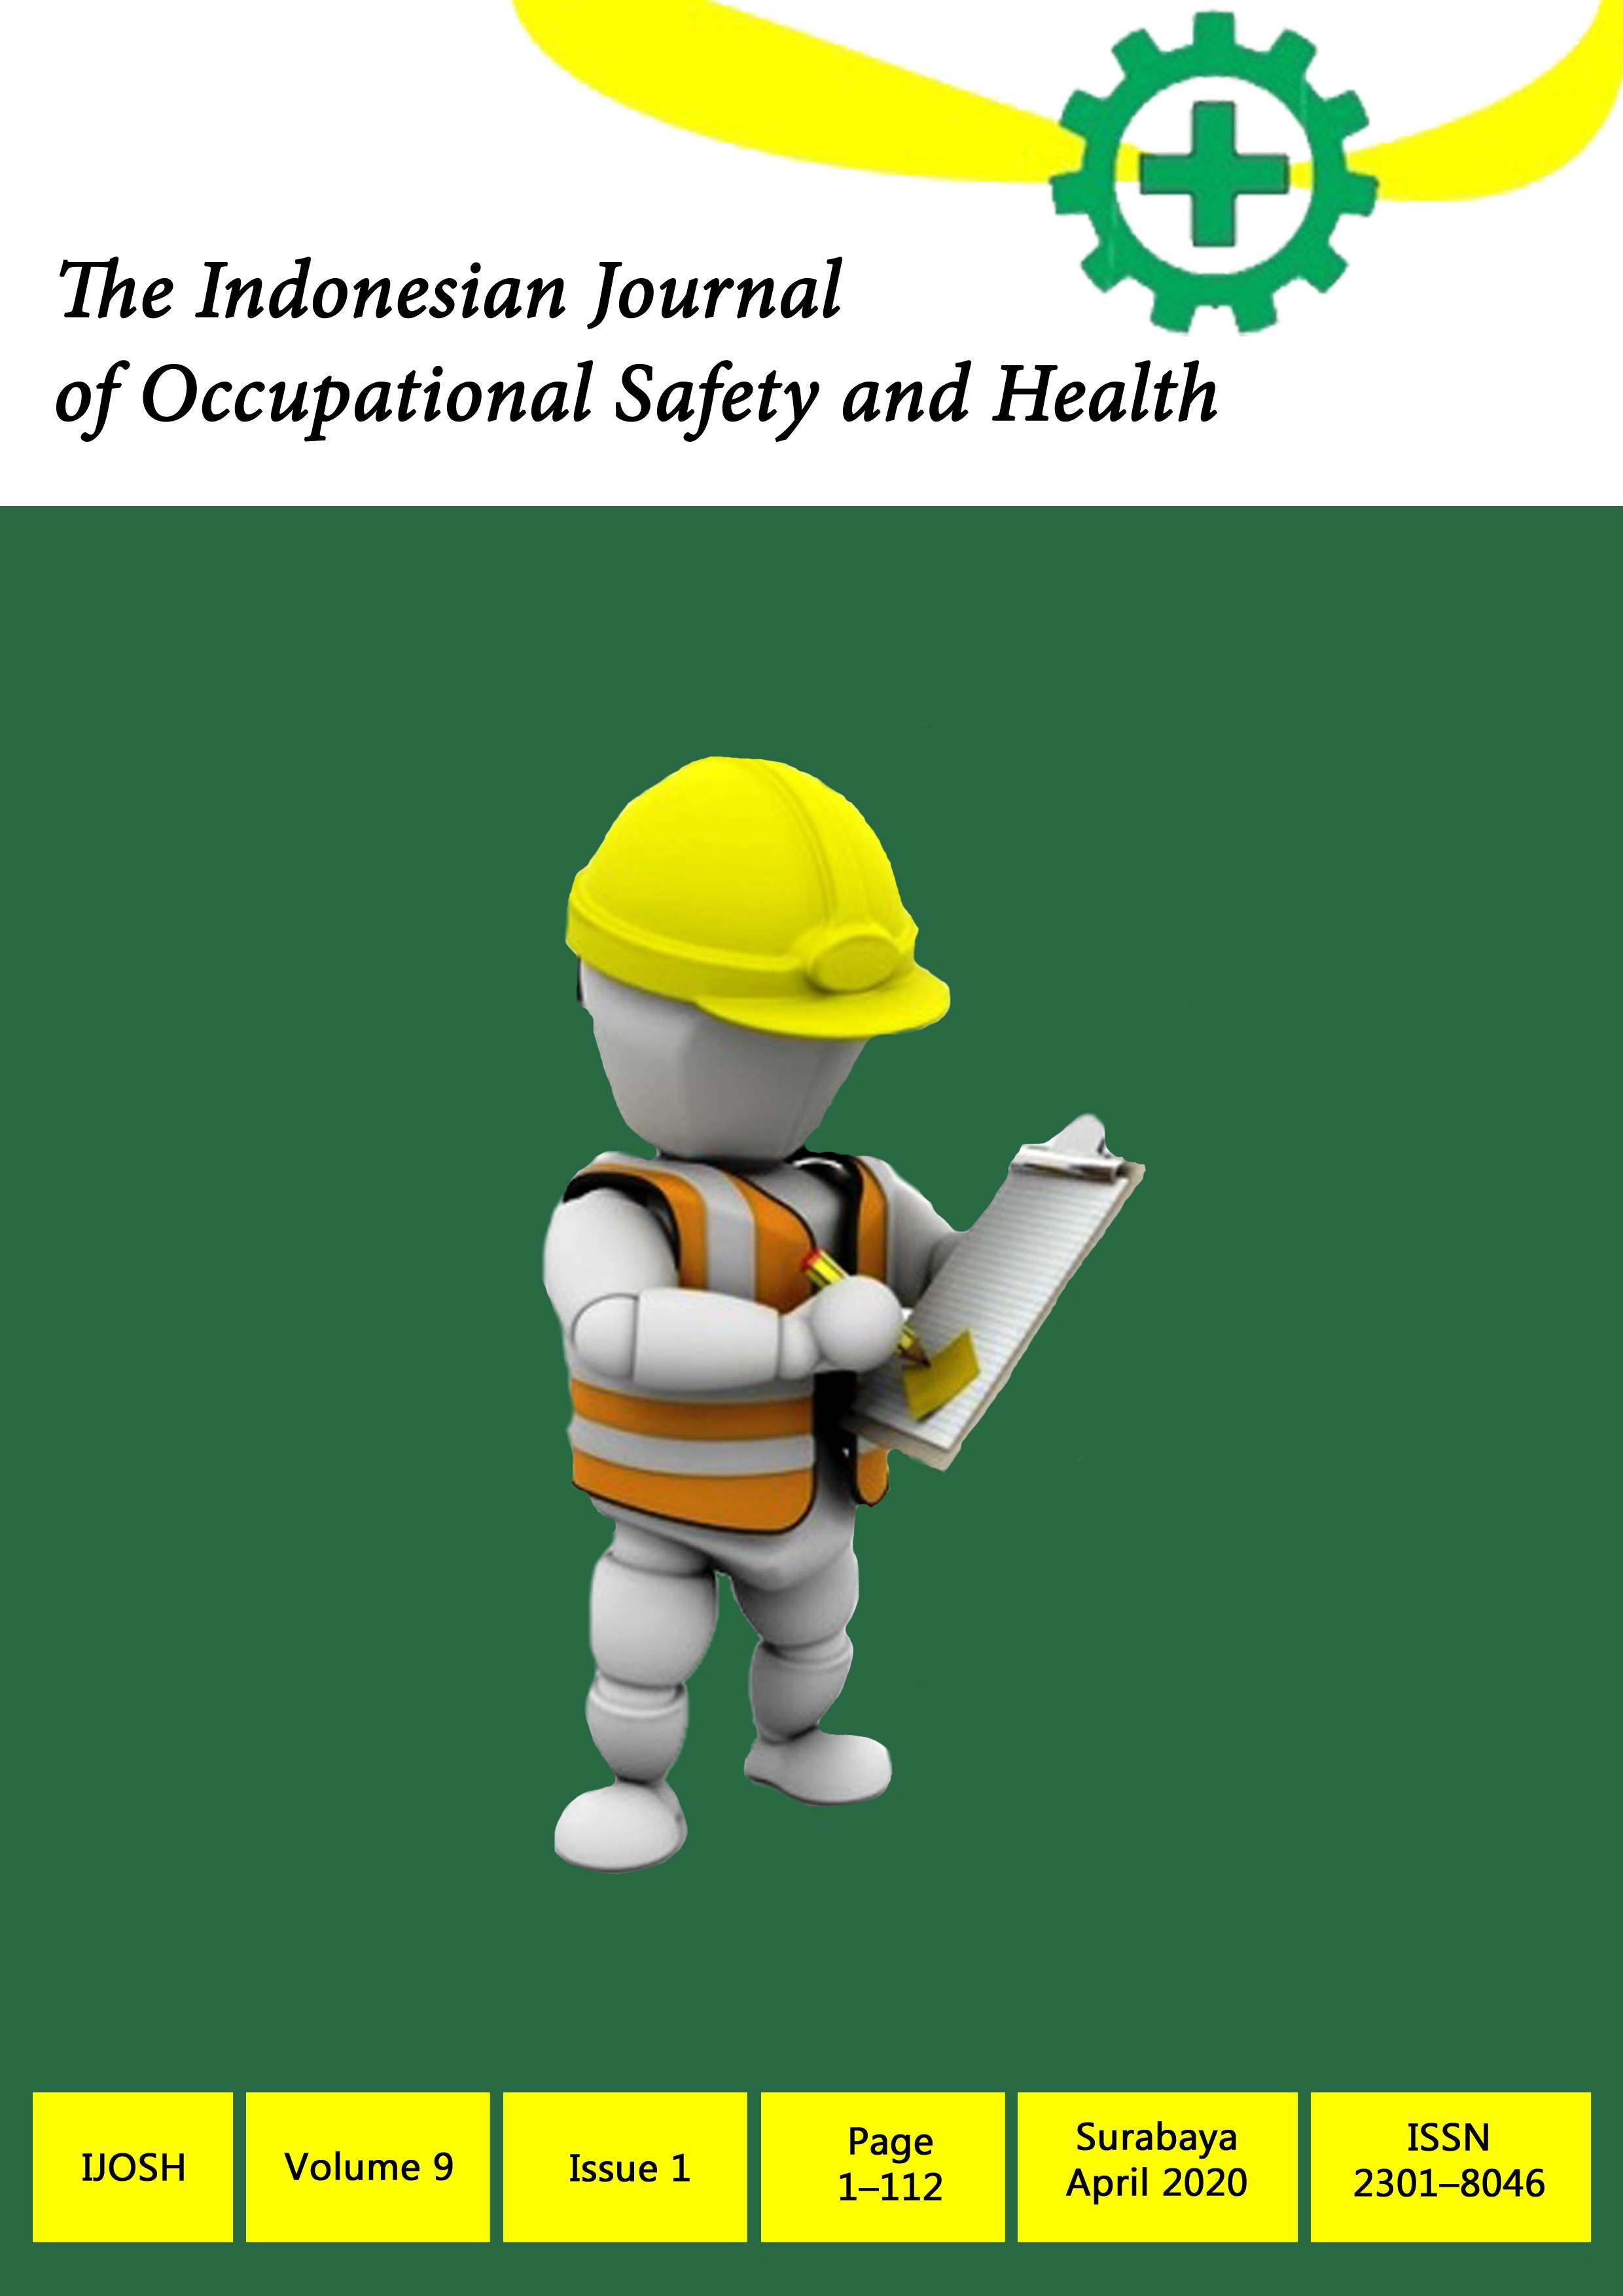 						View Vol. 9 No. 1 (2020): The Indonesian Journal of Occupational Safety and Health
					